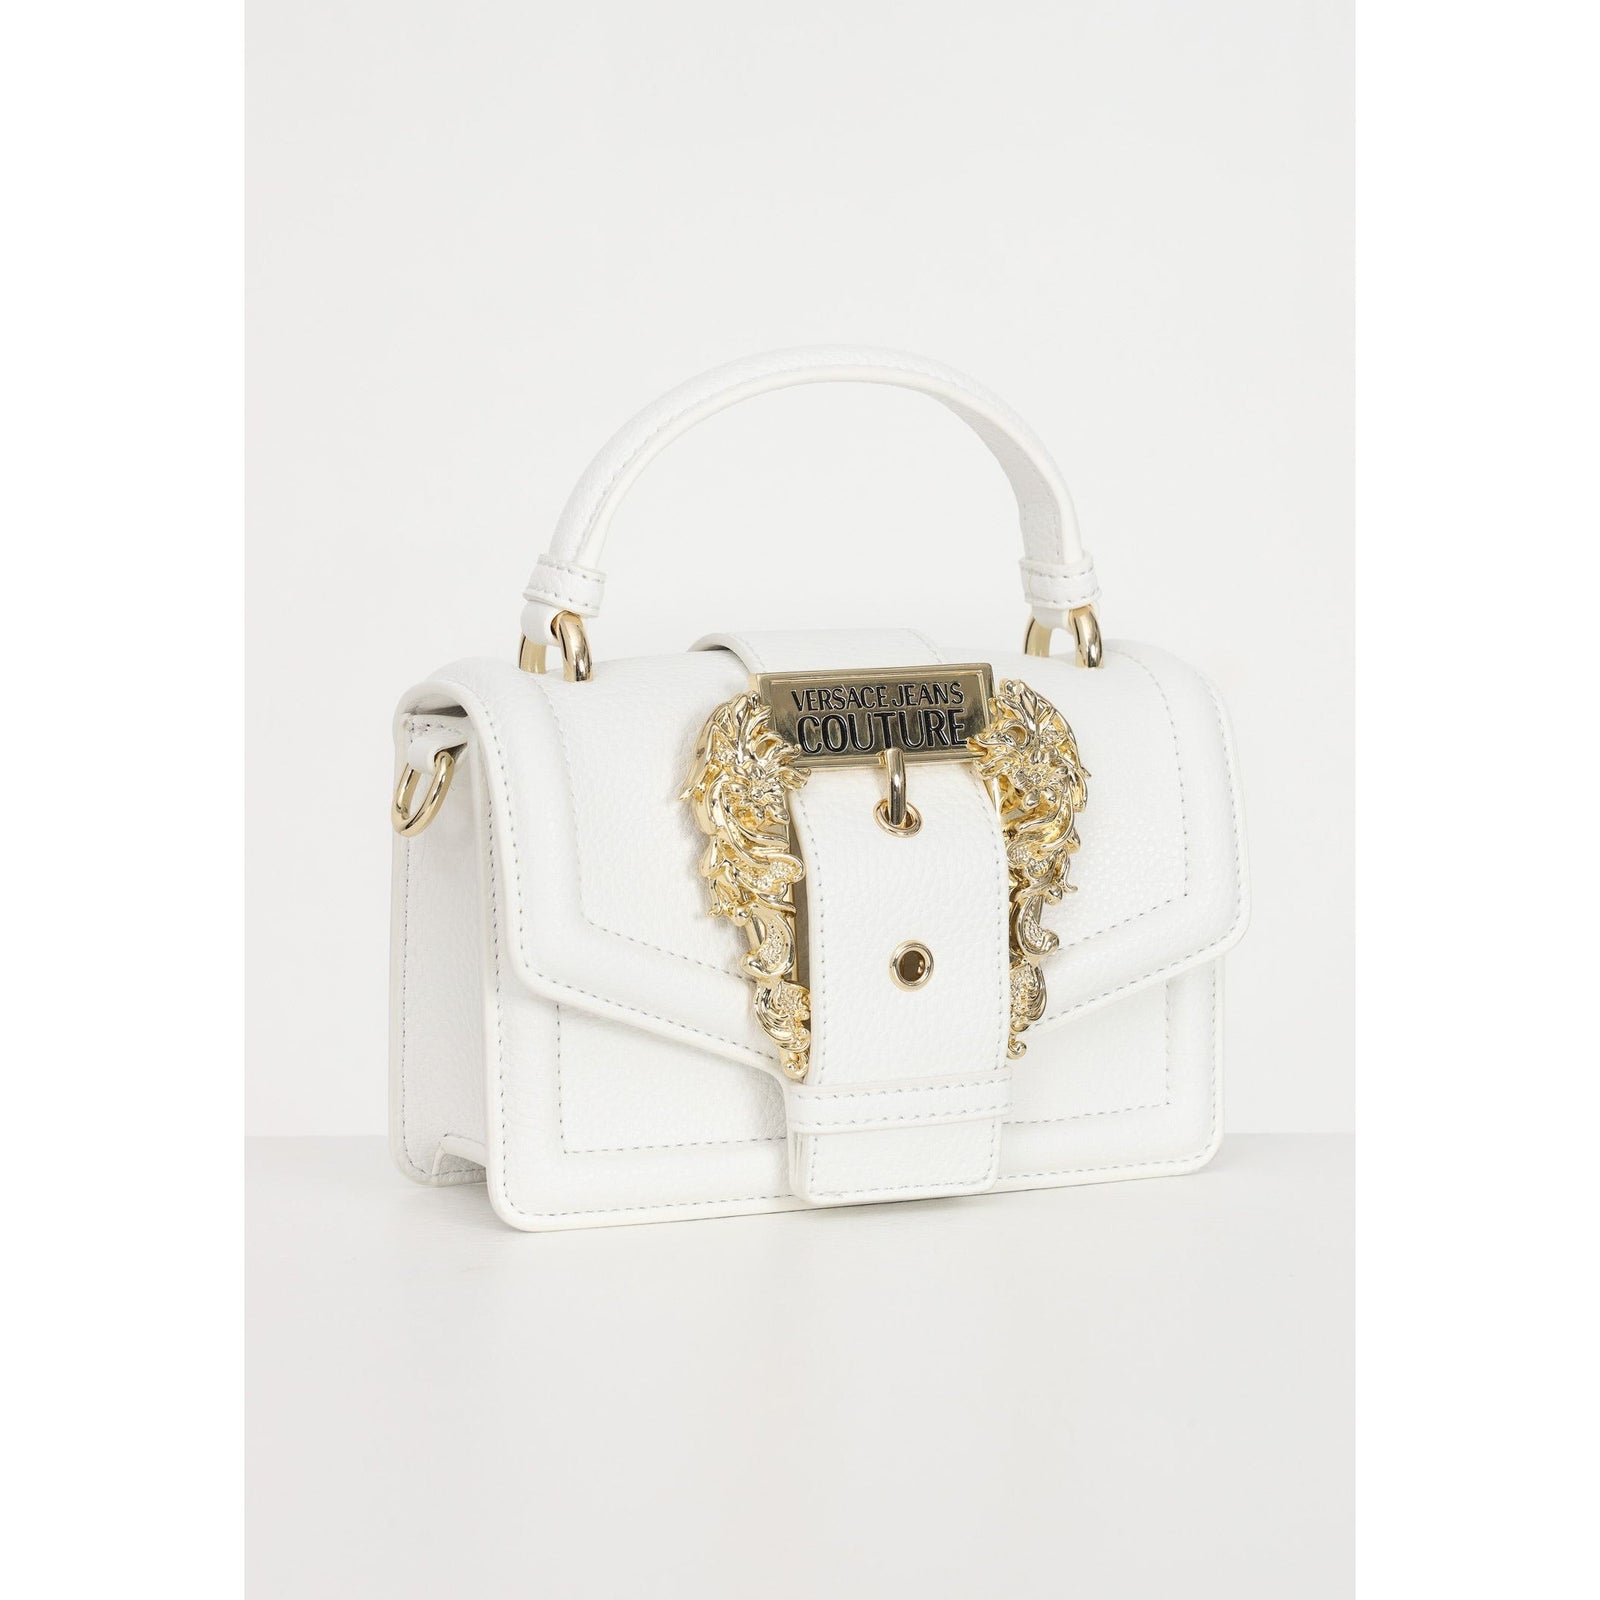 VERSACE JEANS COUTURE BAG WITH MAXI BUCKLE AND LOGO - Yooto